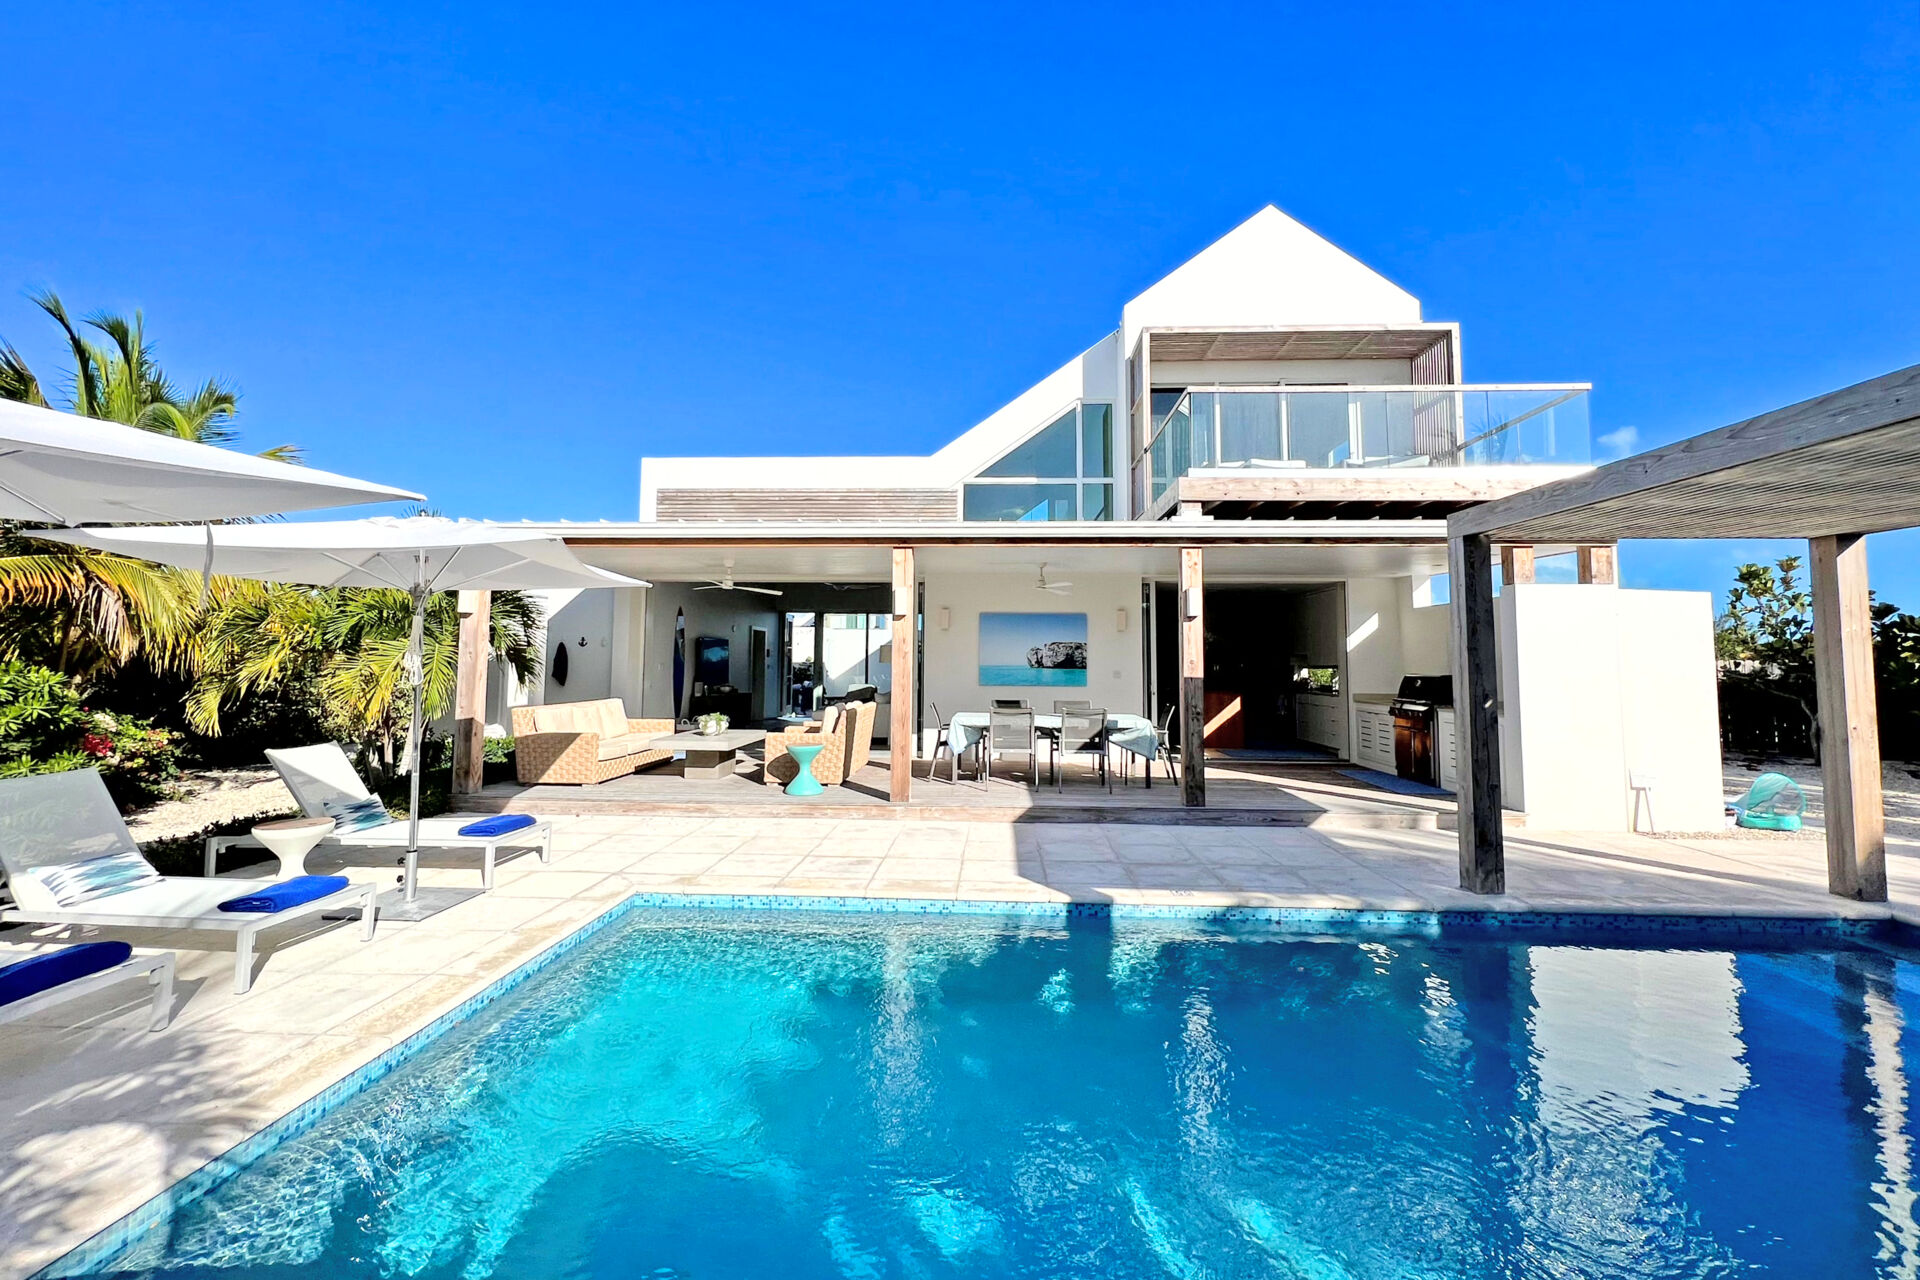 SKIP THE SNOW IN FAVOR OF LUXURIOUS BEACH VILLAS THIS HOLIDAY